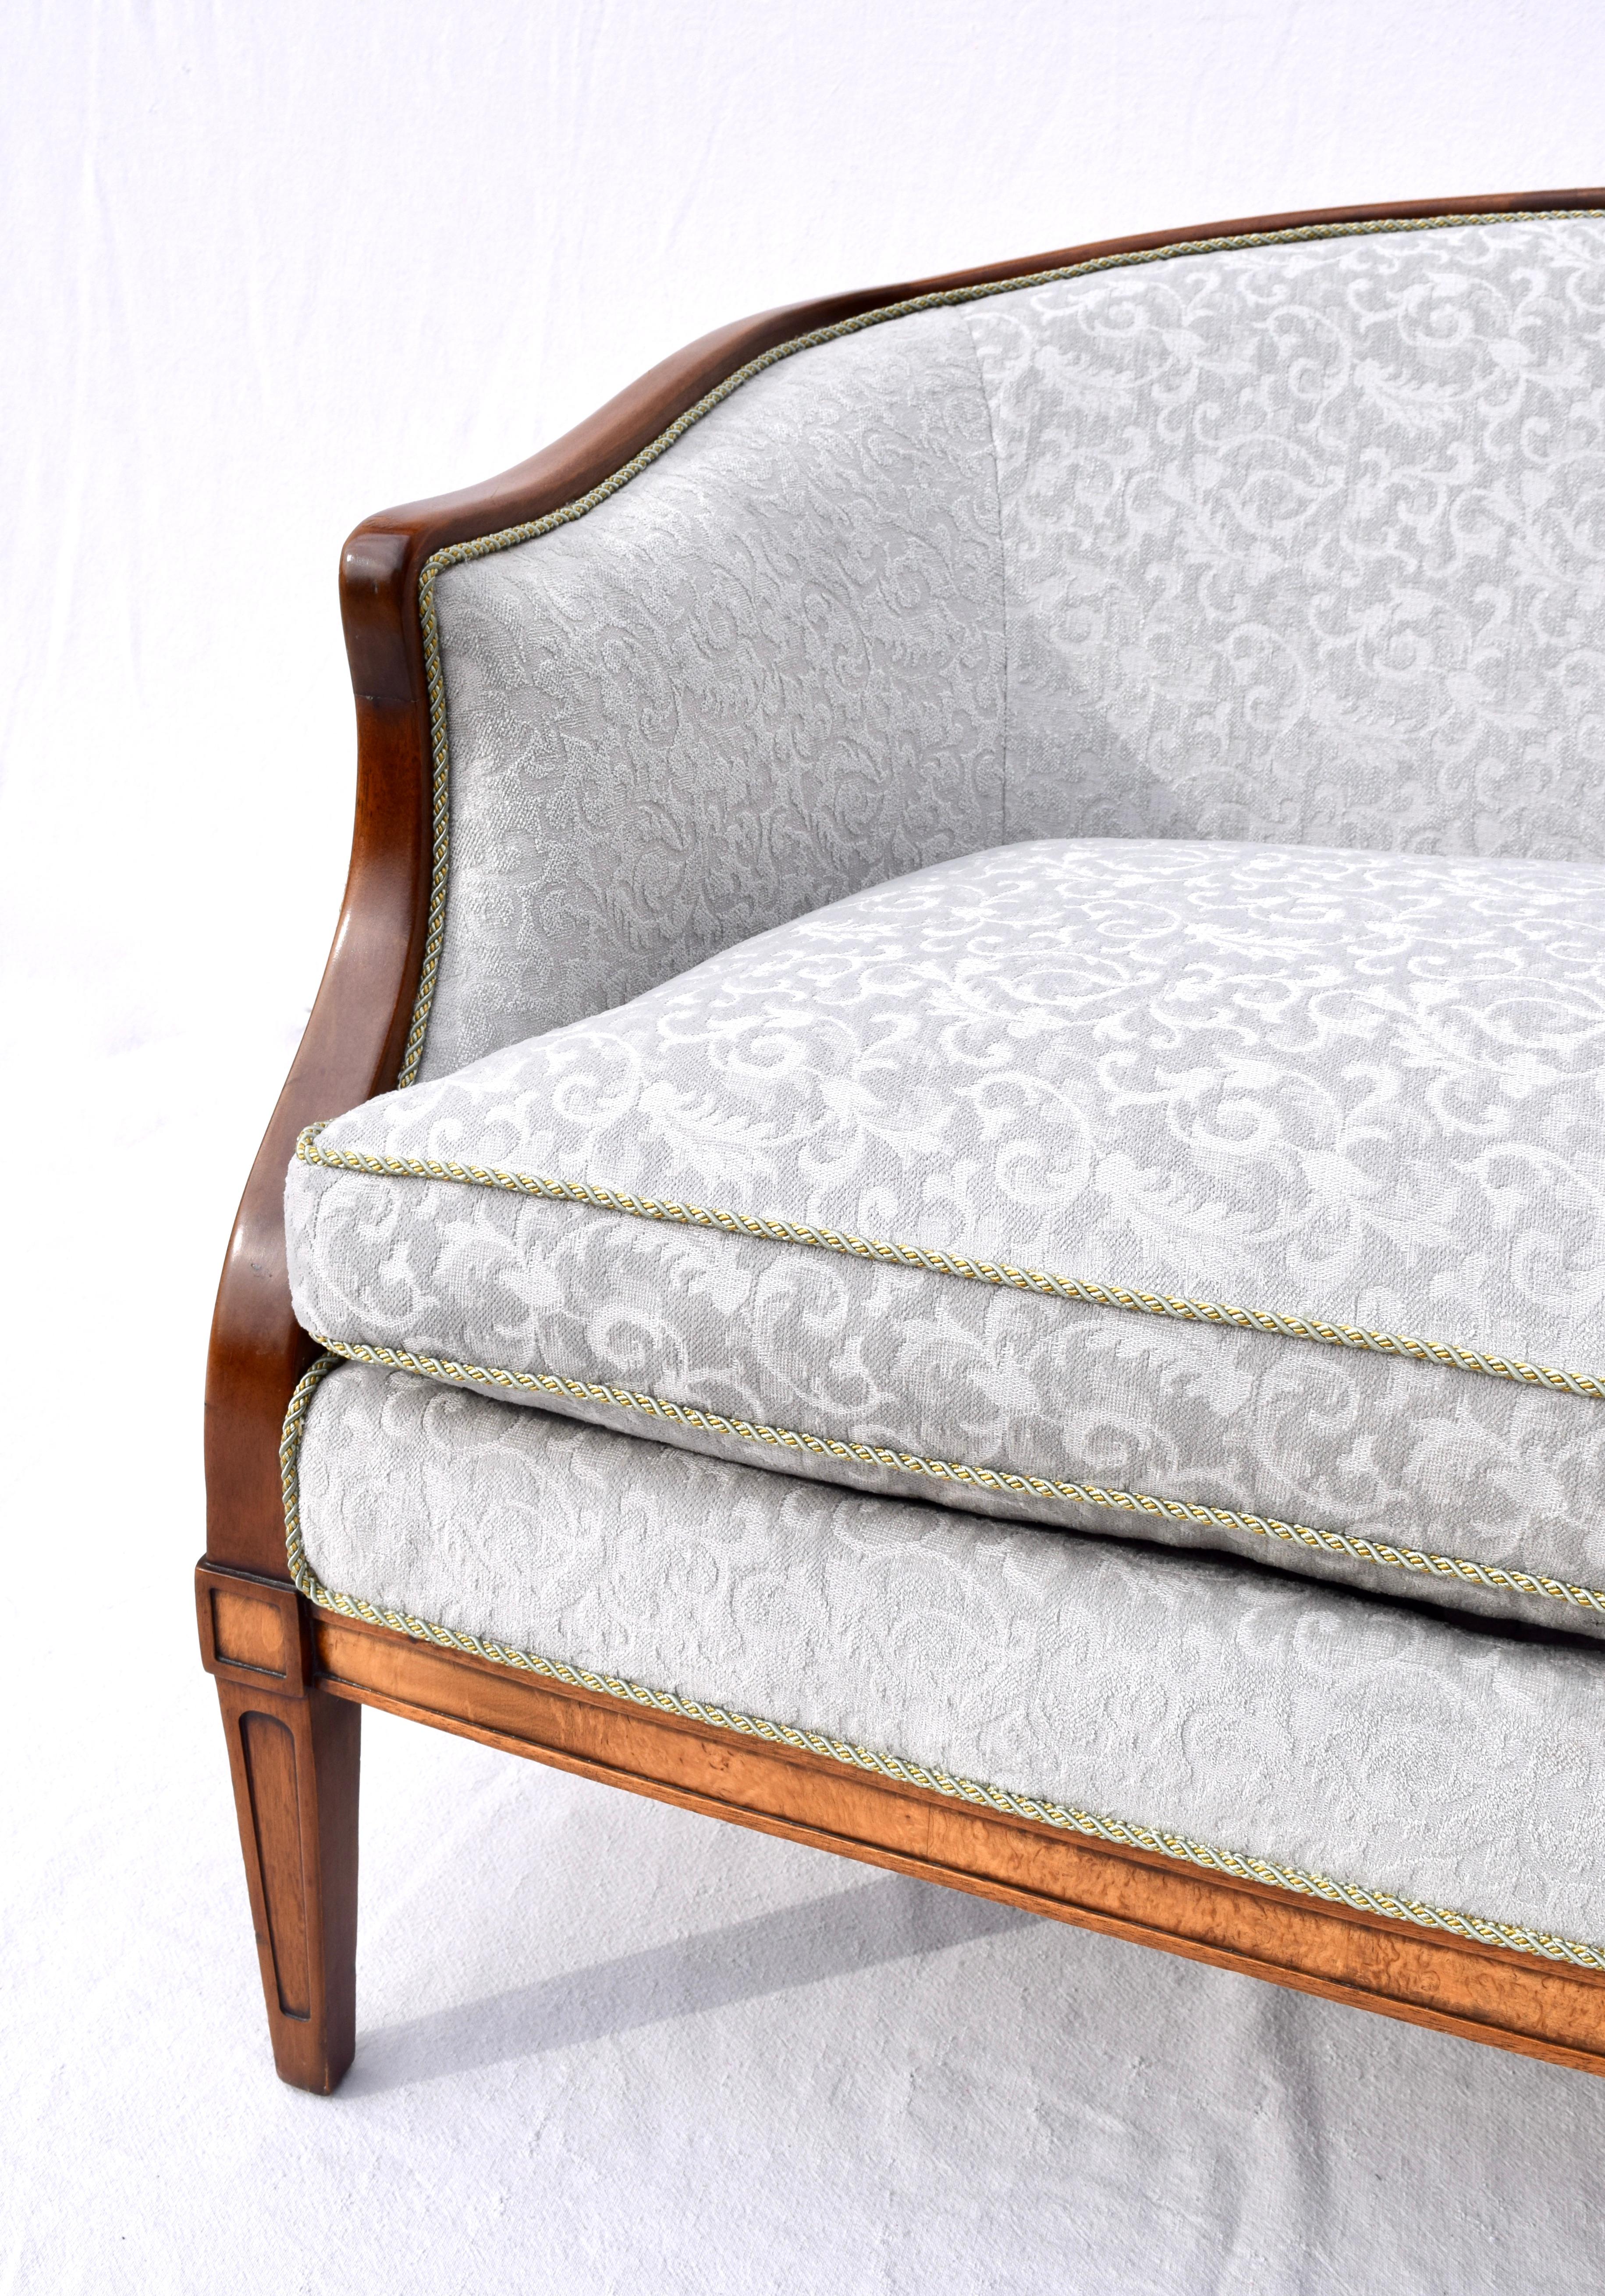 Vintage Hepplewhite style mahogany settee with tapered and burl inlay legs. Exceptional custom upholstery in soft grey cut velvet with single plush goose down cushion. Graceful lines in the arched back, rolled mahogany arms and shaped rear legs.